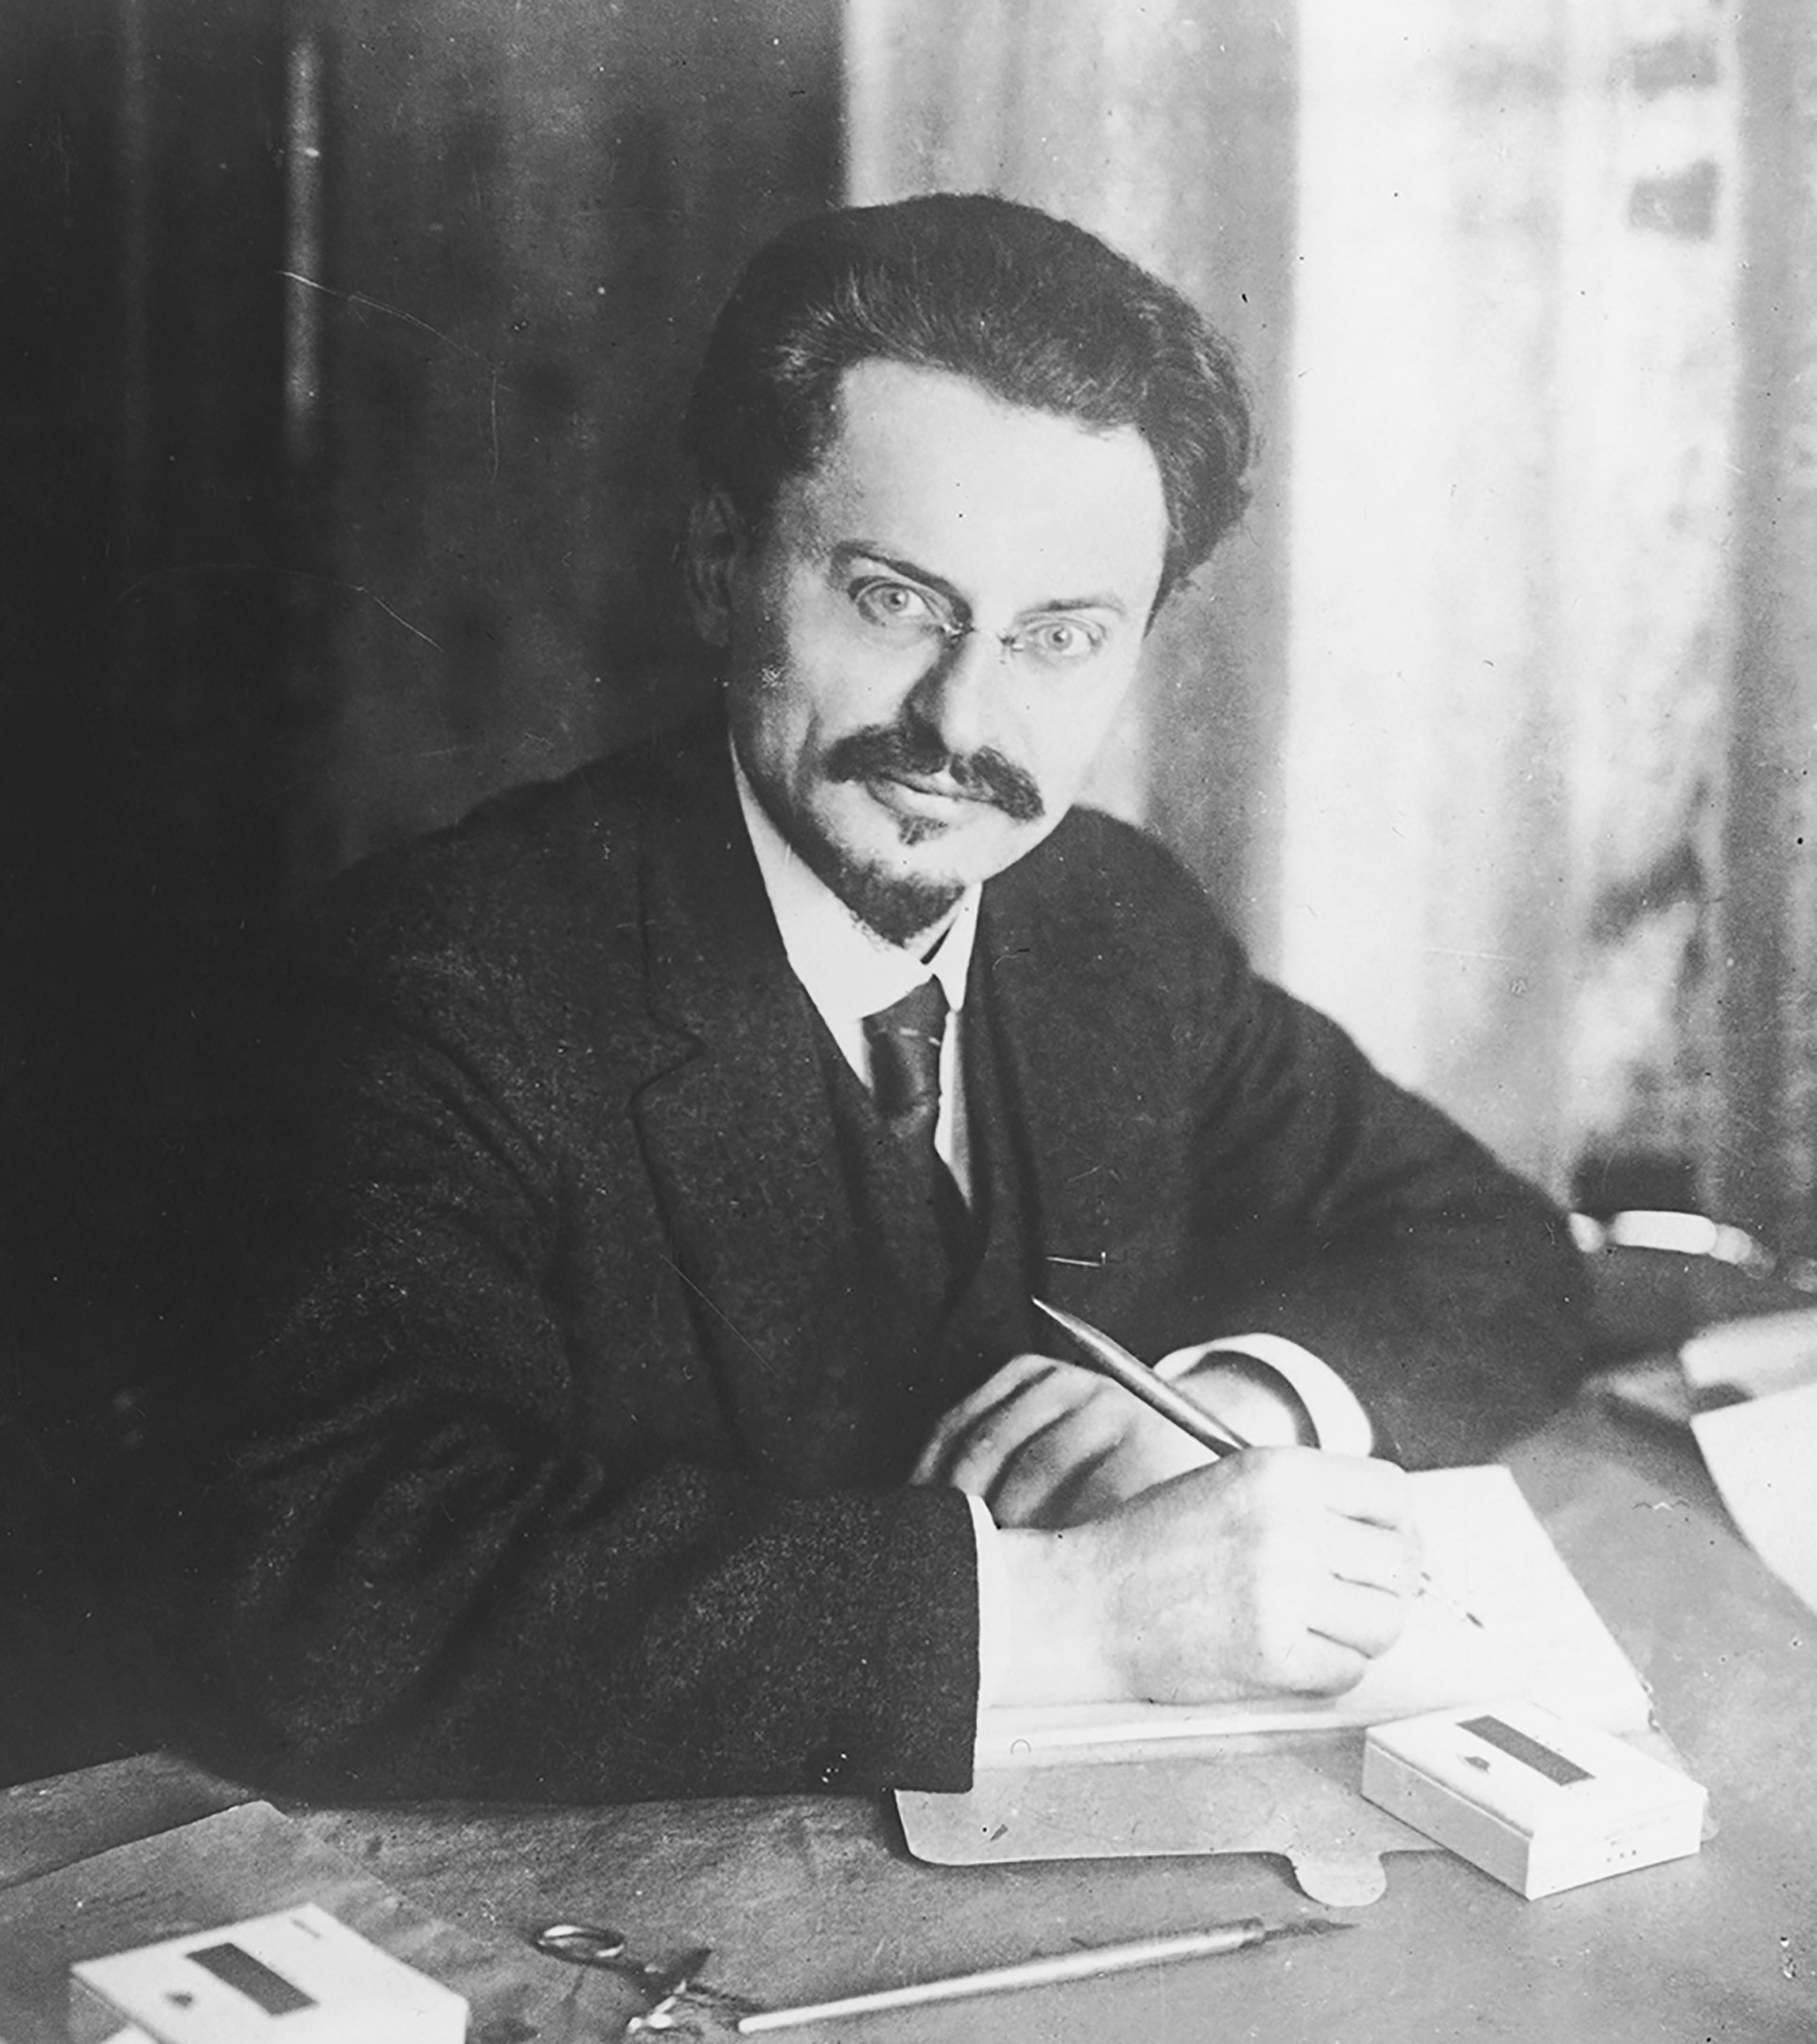 Sudoplatov plotted Trotsky's assassination as well, interrupting the life of an old Communist in exile. 